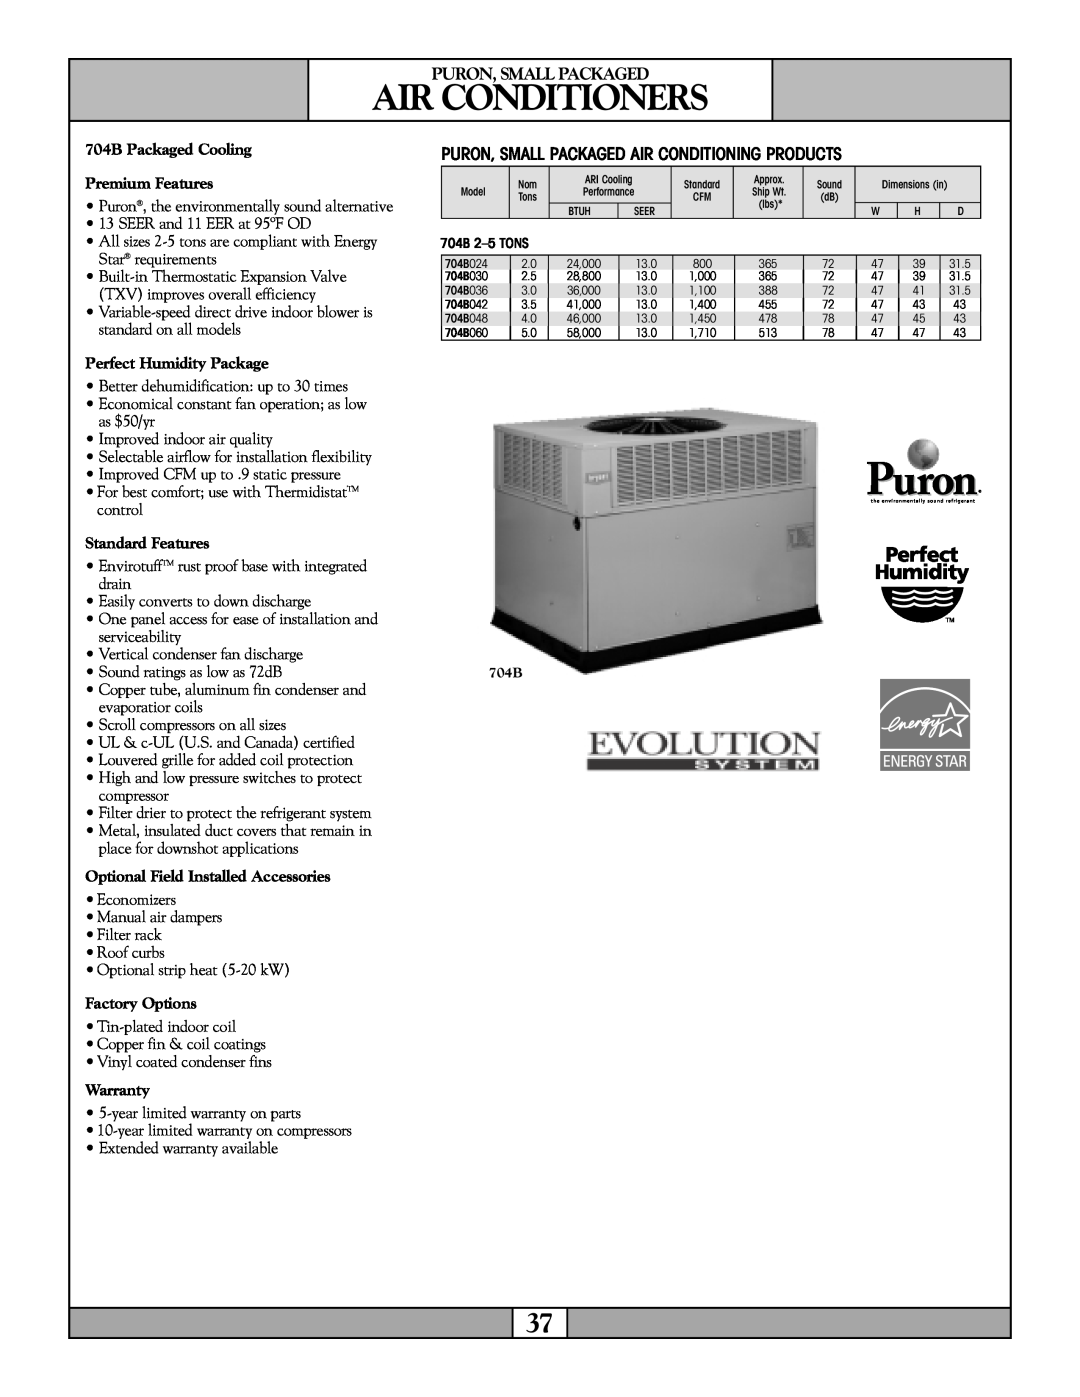 Revolutionary Cooling Systems 704B060 warranty Air Conditioners, Puron, Small Packaged, Perfect Humidity Package, Warranty 